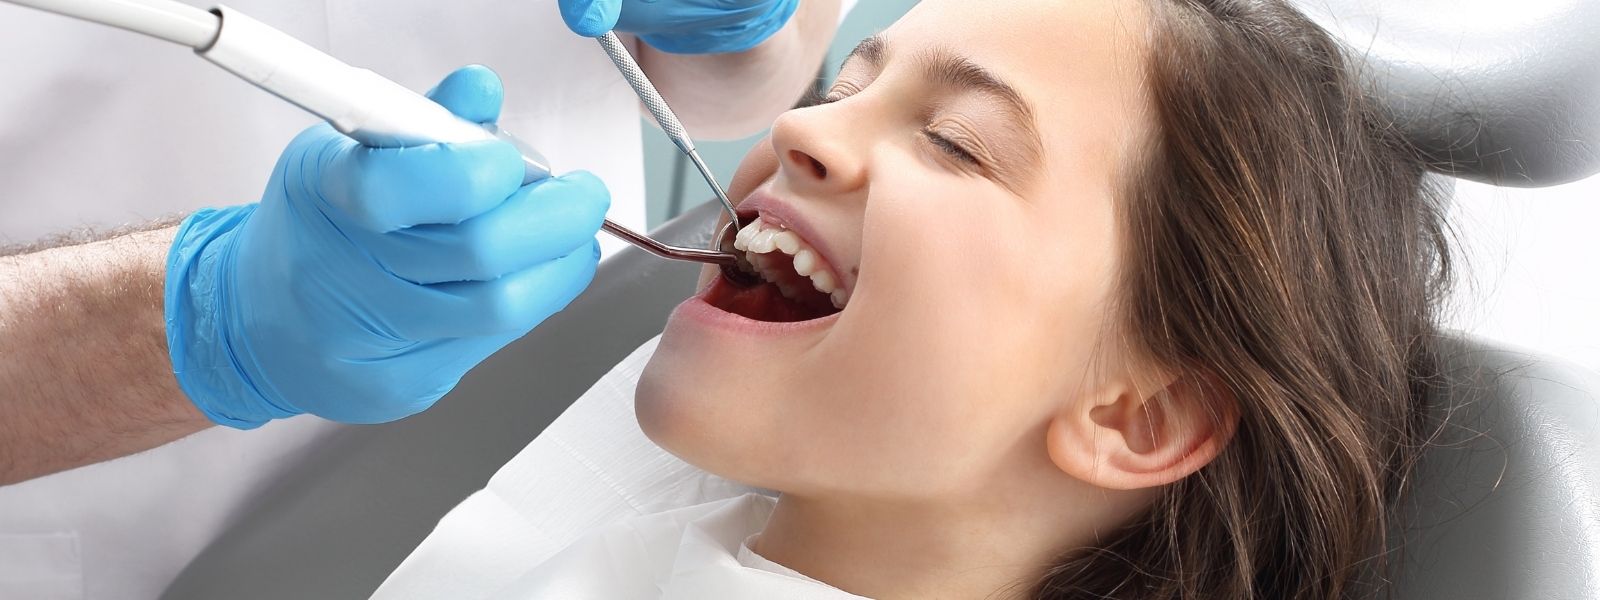 Young Girl at Dental during a procedure